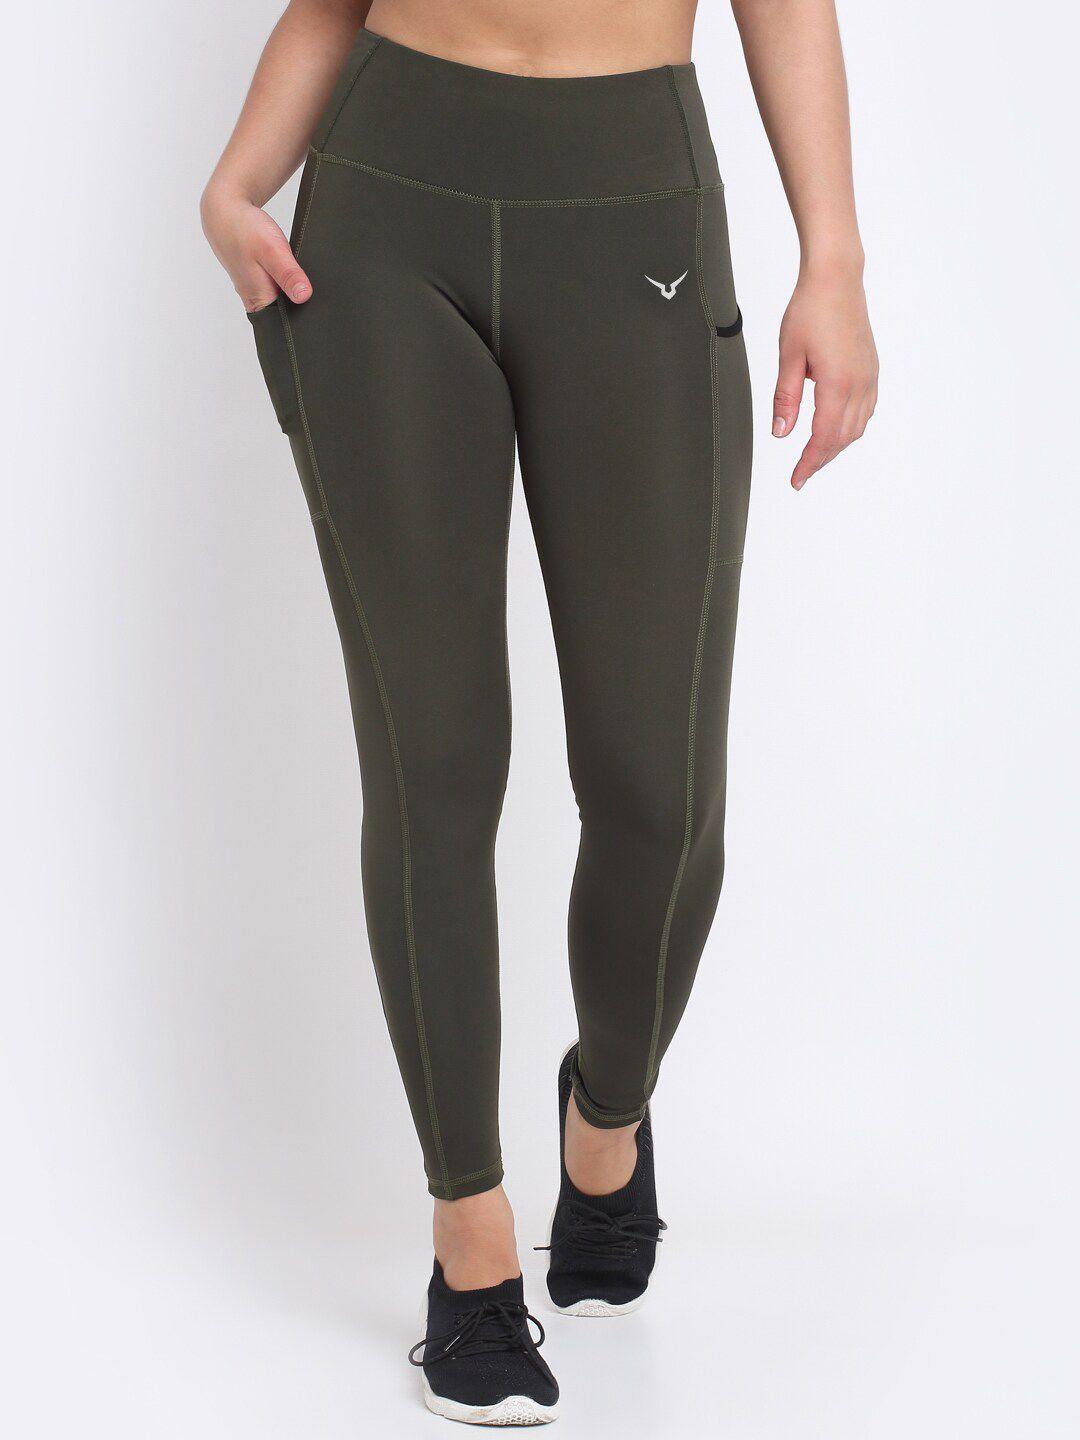 invincible women training tights with side pocket